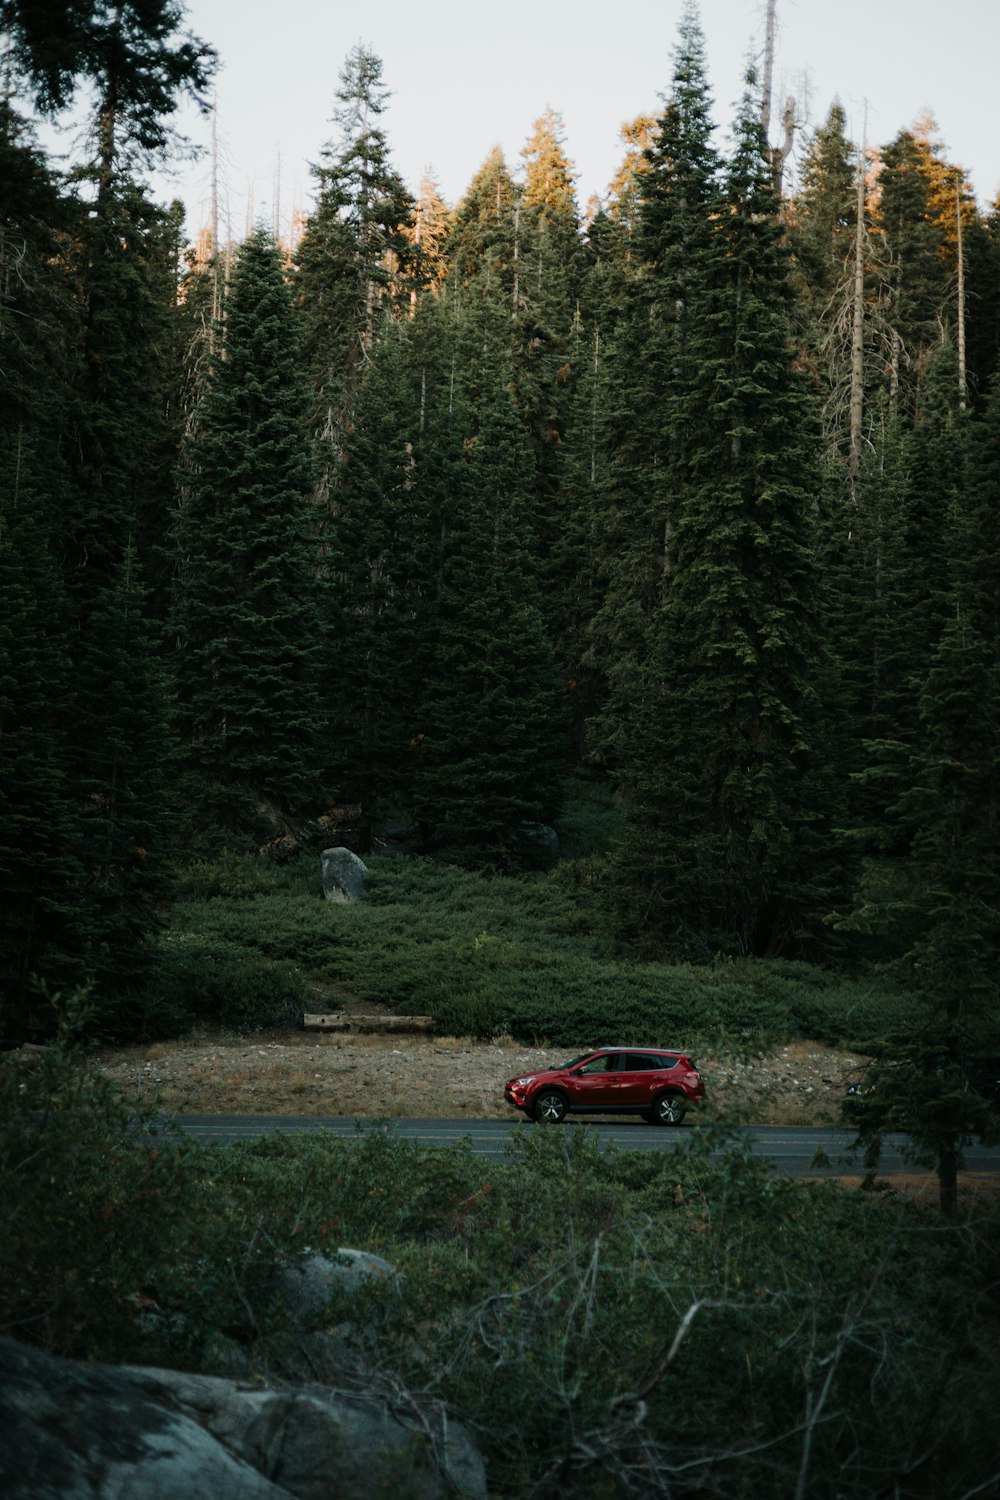 a red car on a road surrounded by trees